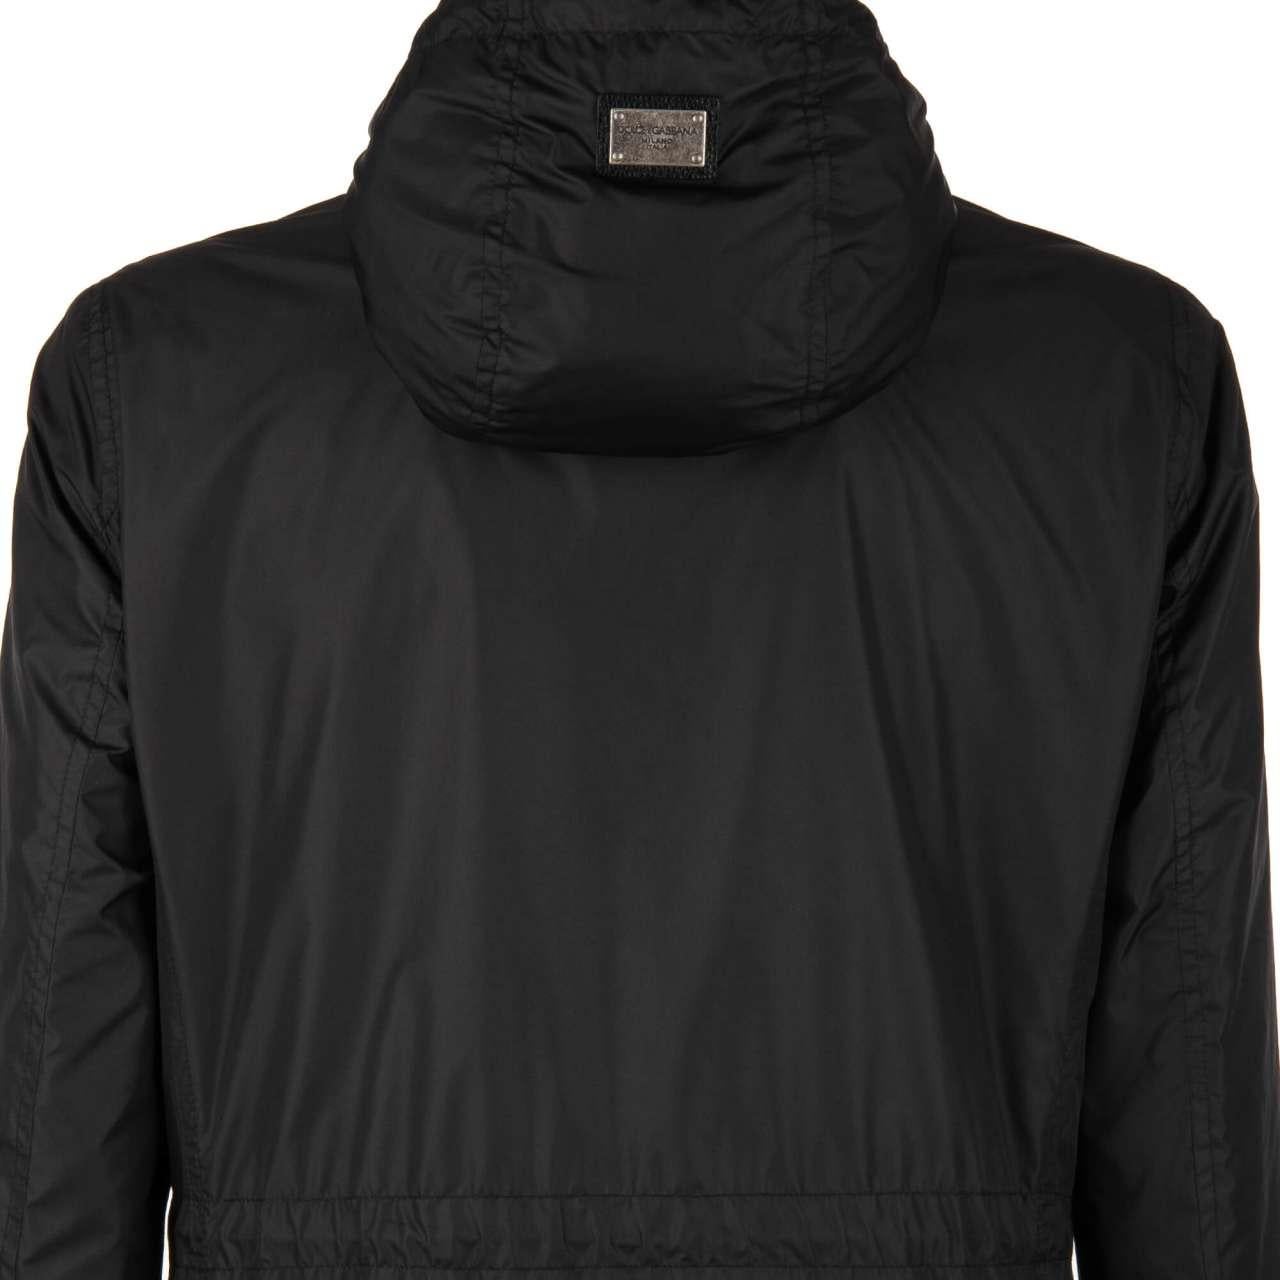 Dolce & Gabbana Classic Rain Parka Jacket with Pockets and Hoody Black 46 For Sale 1